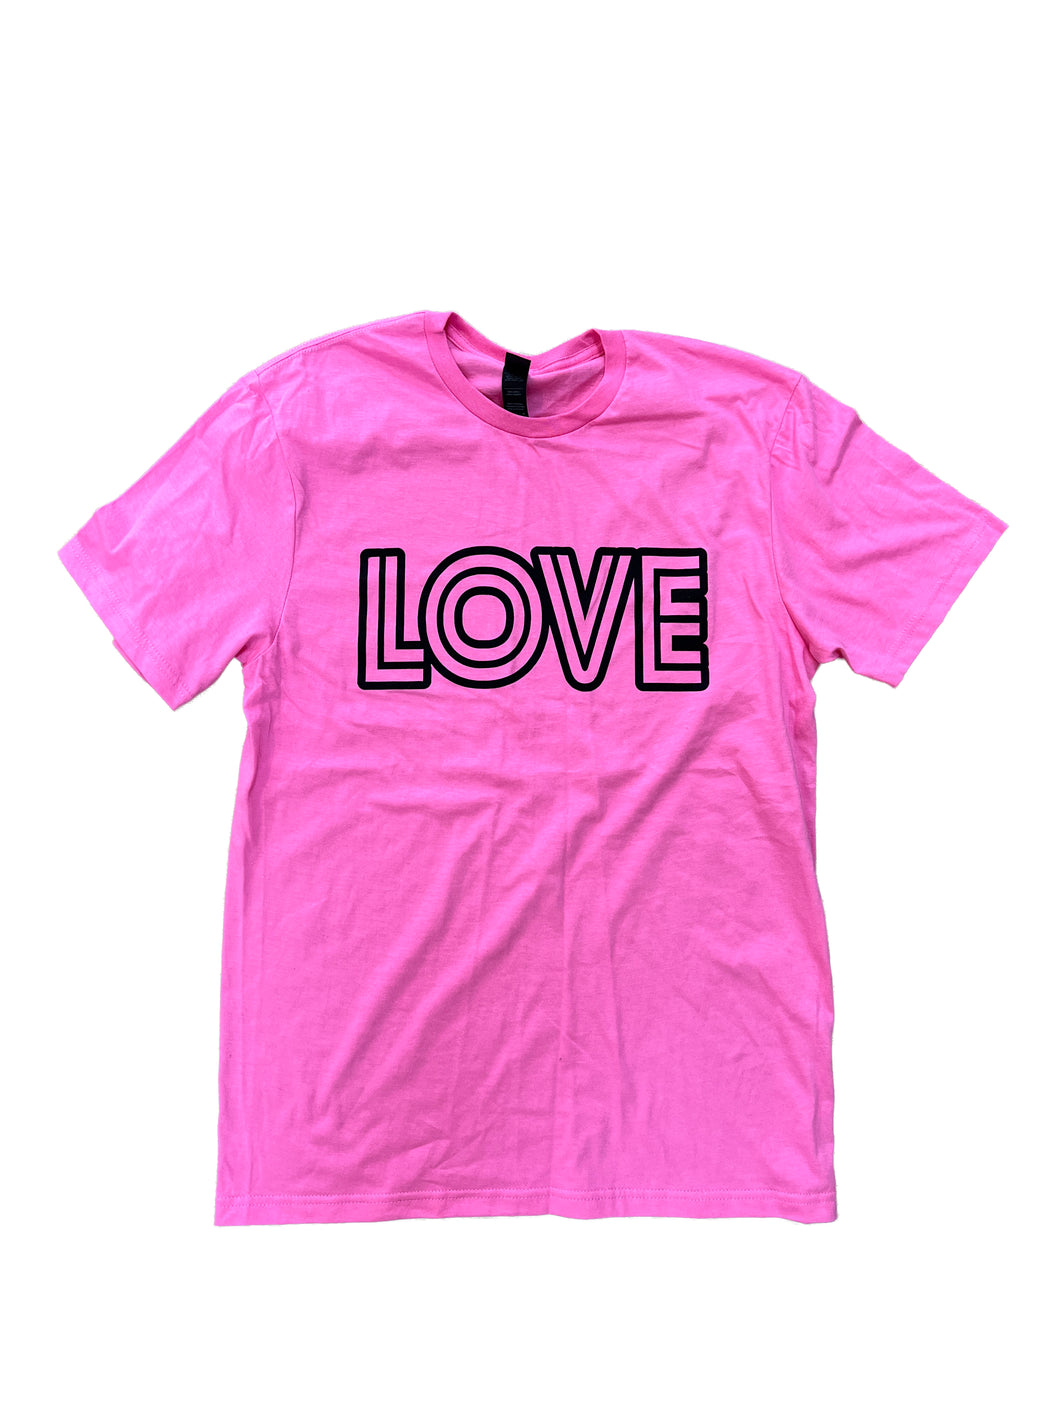 Hot Pink Graphic Tee - Love